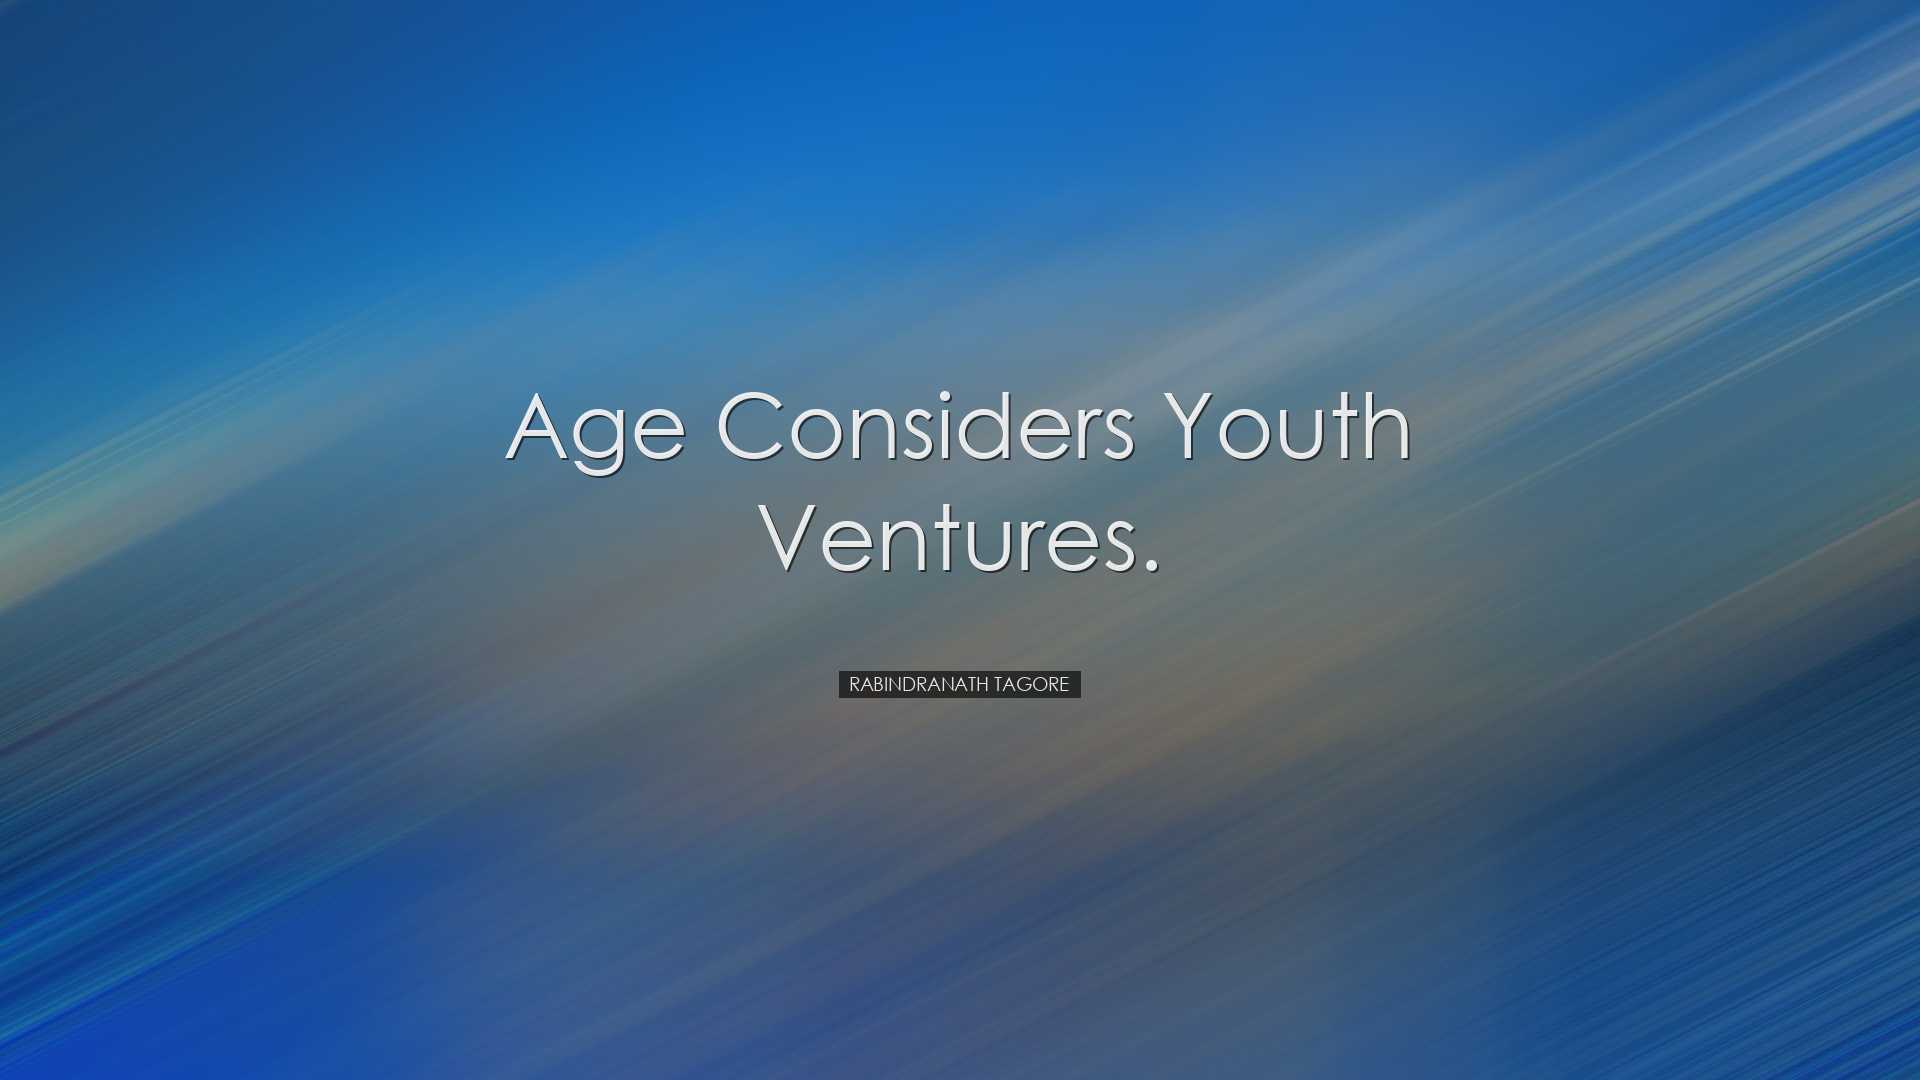 Age considers youth ventures. - Rabindranath Tagore